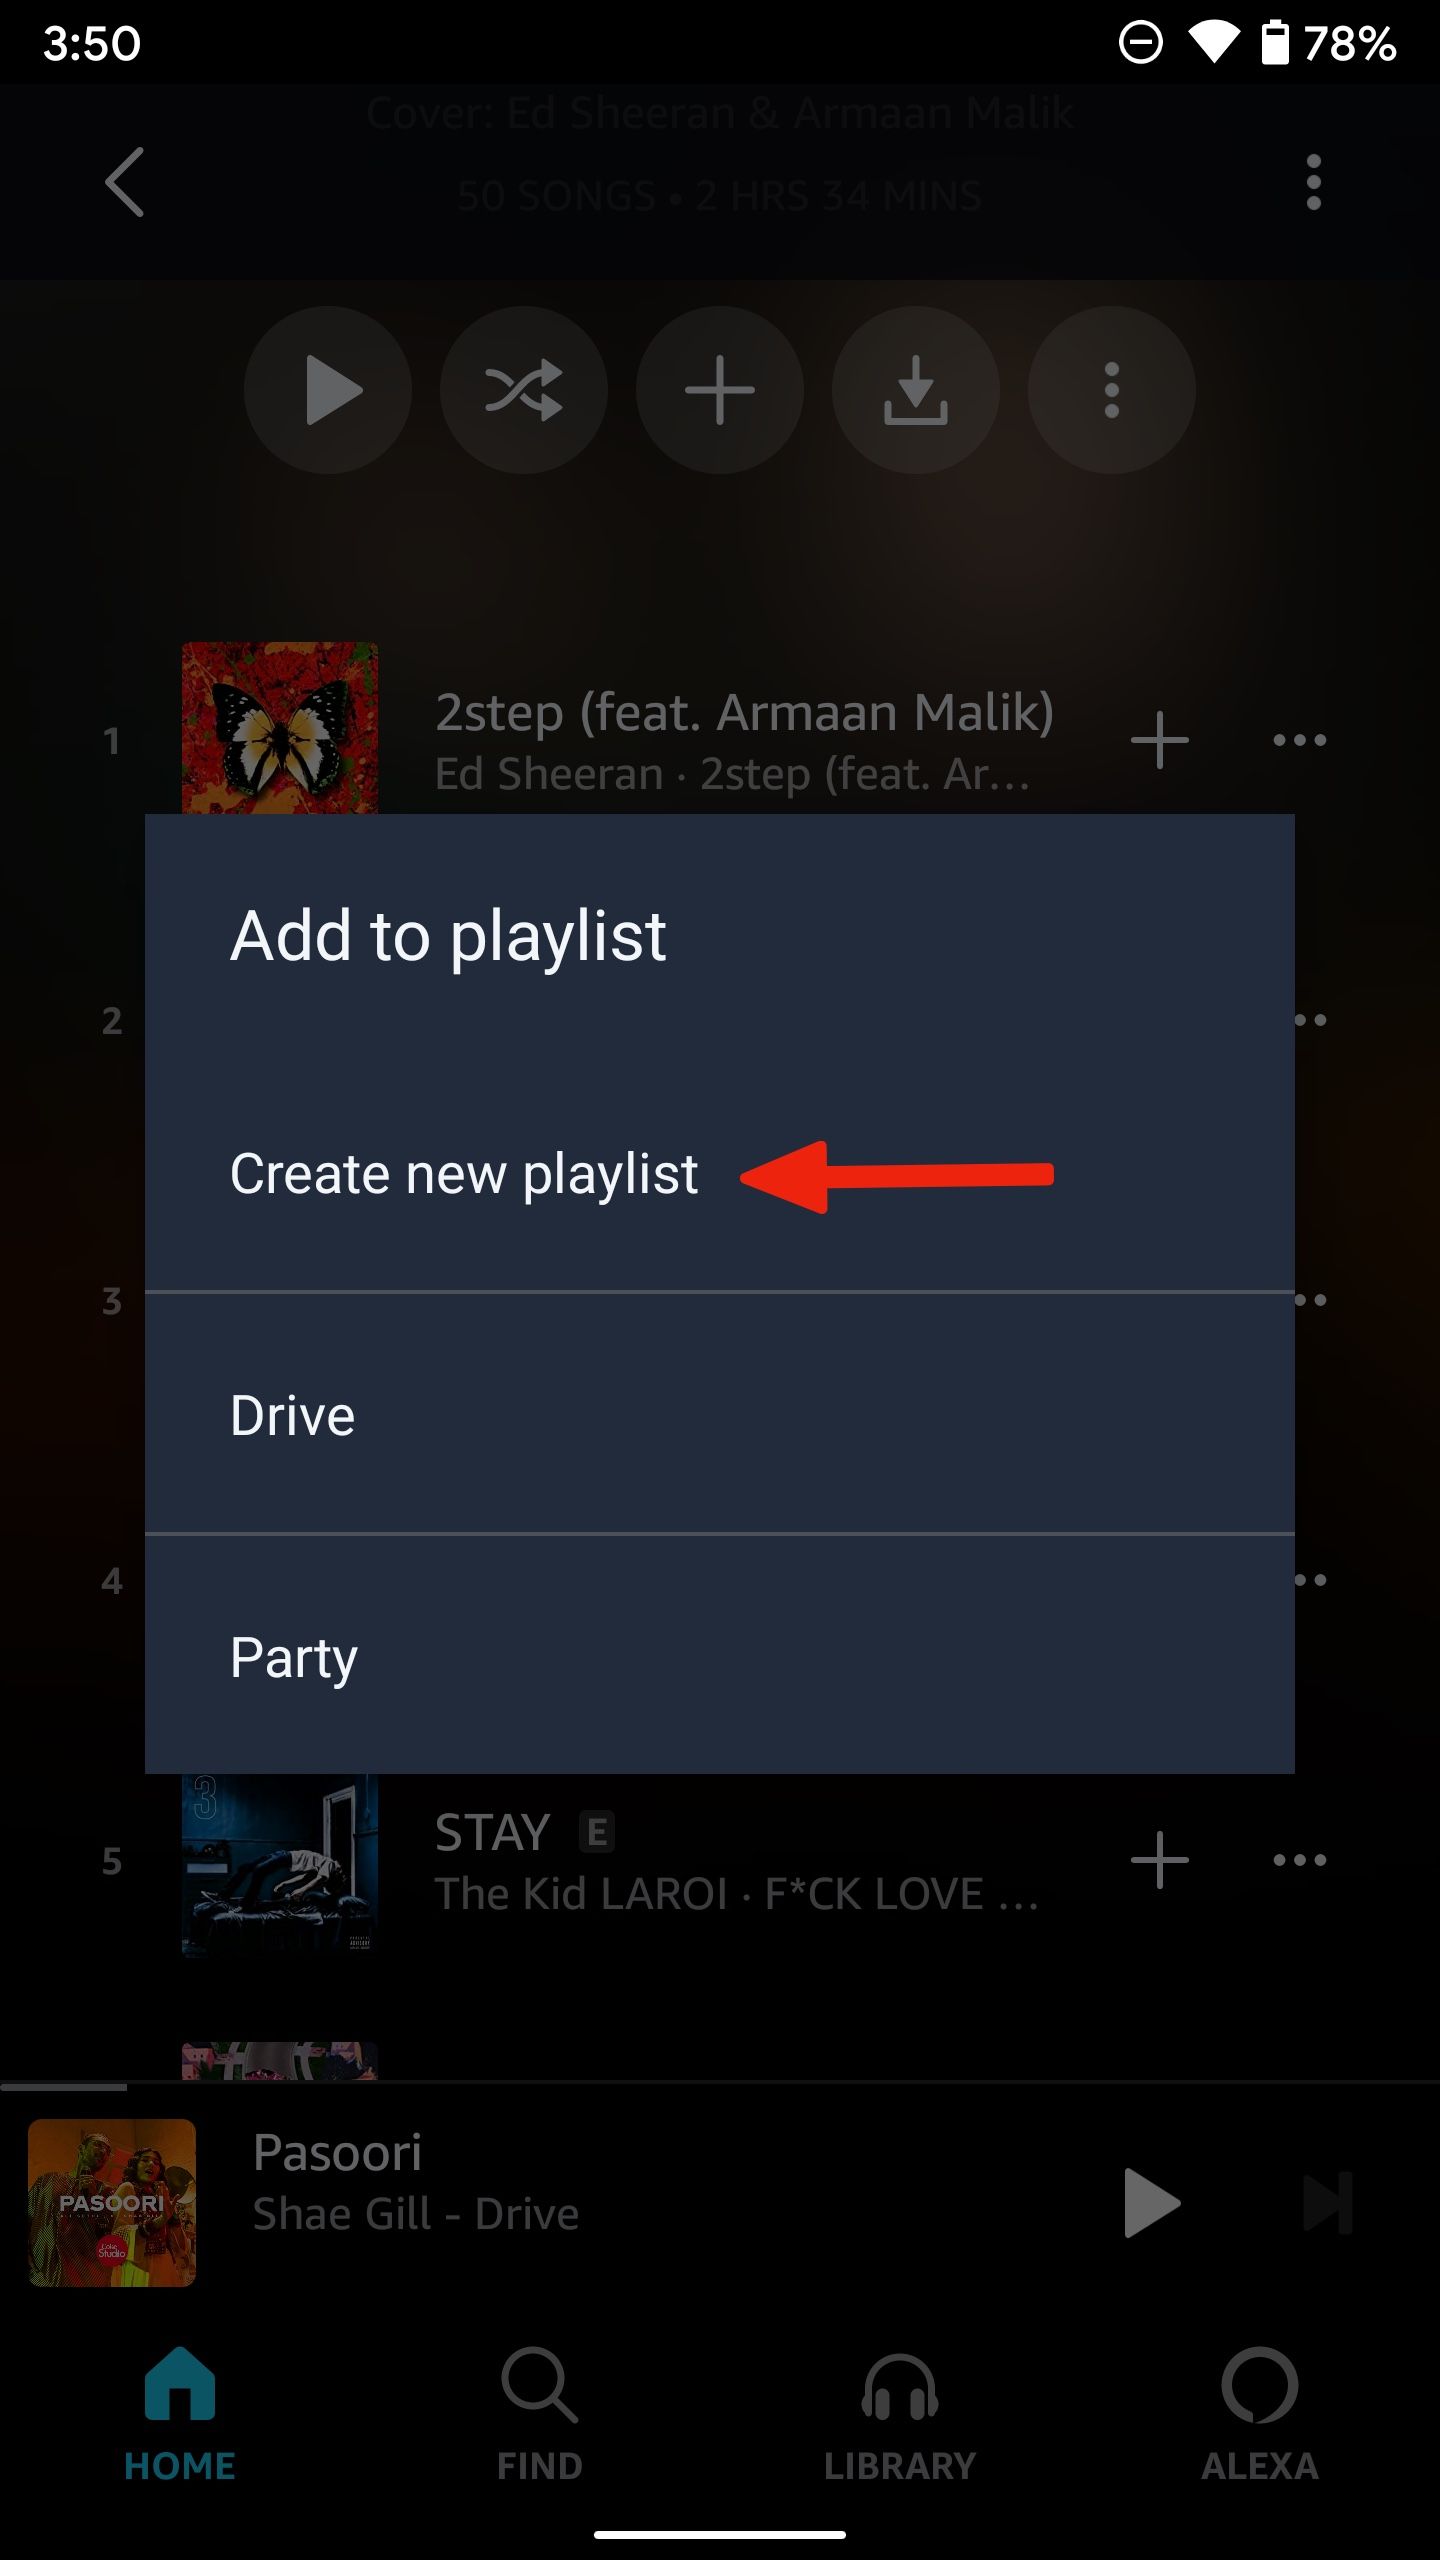 Add to playlist popup for a specific song with an arrow pointing to 'Create new playlist'.